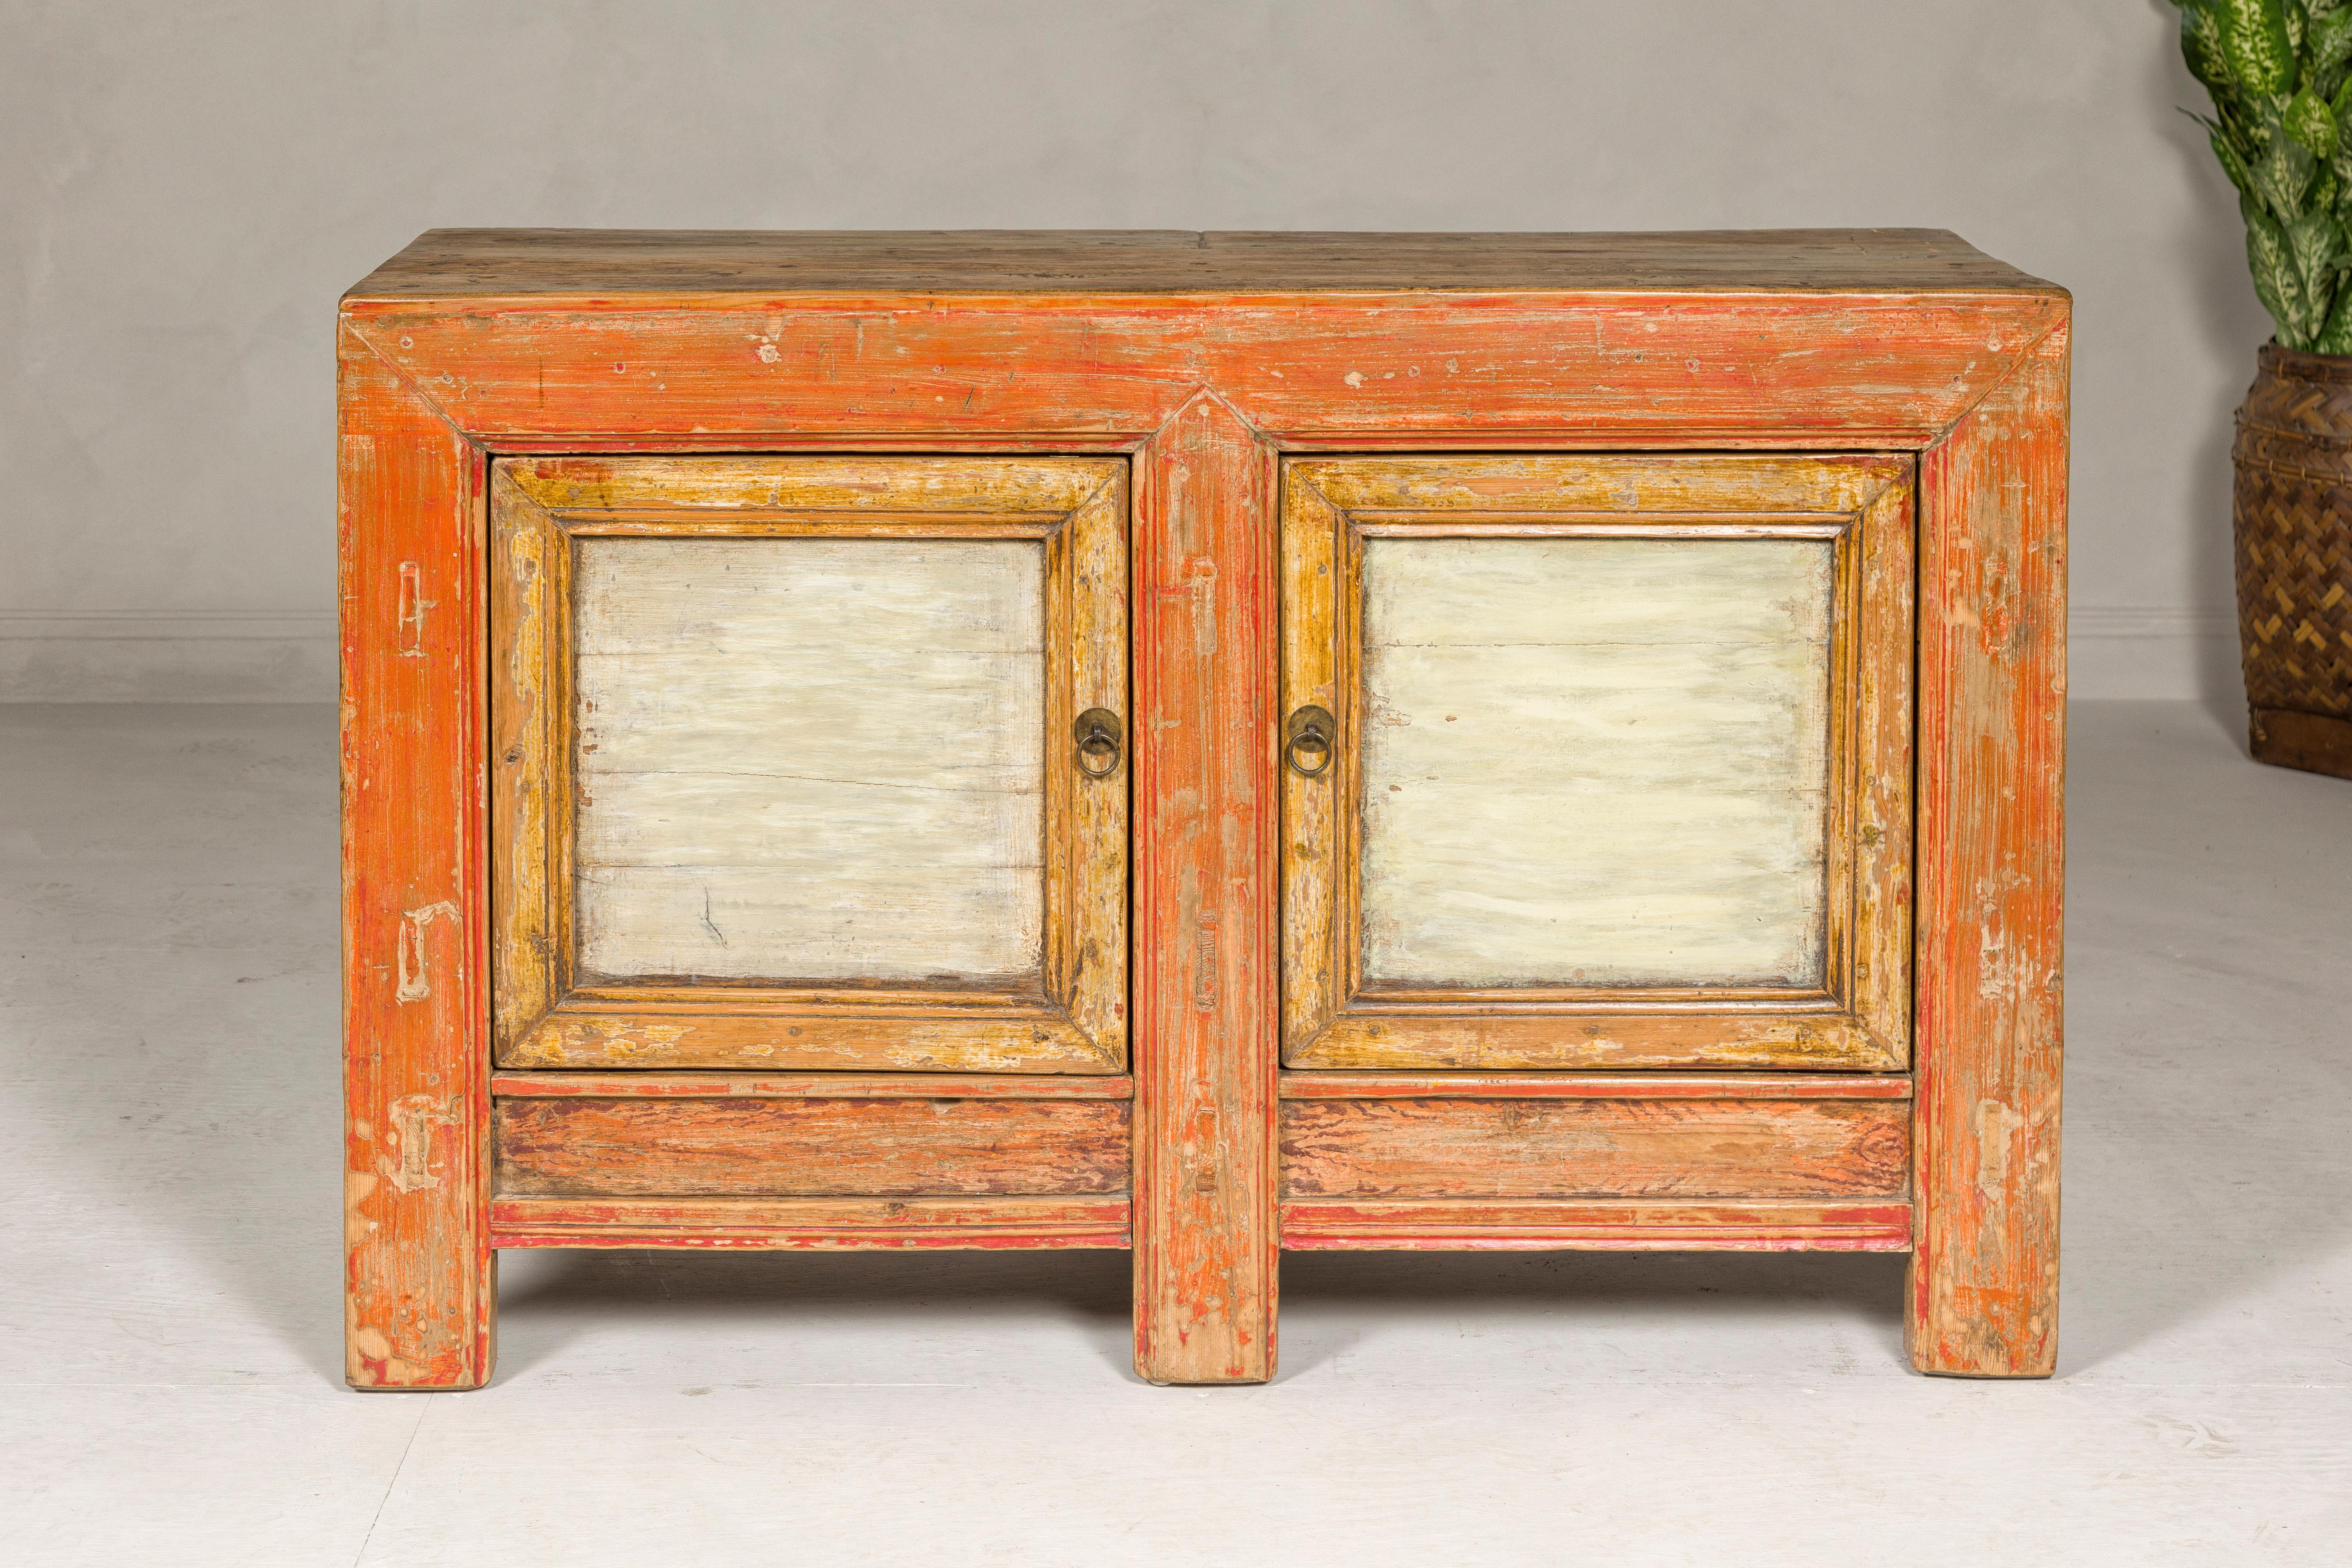 Hand-Painted Country Style Painted Two-Door Buffet with Distressed Orange and Off-White Color For Sale